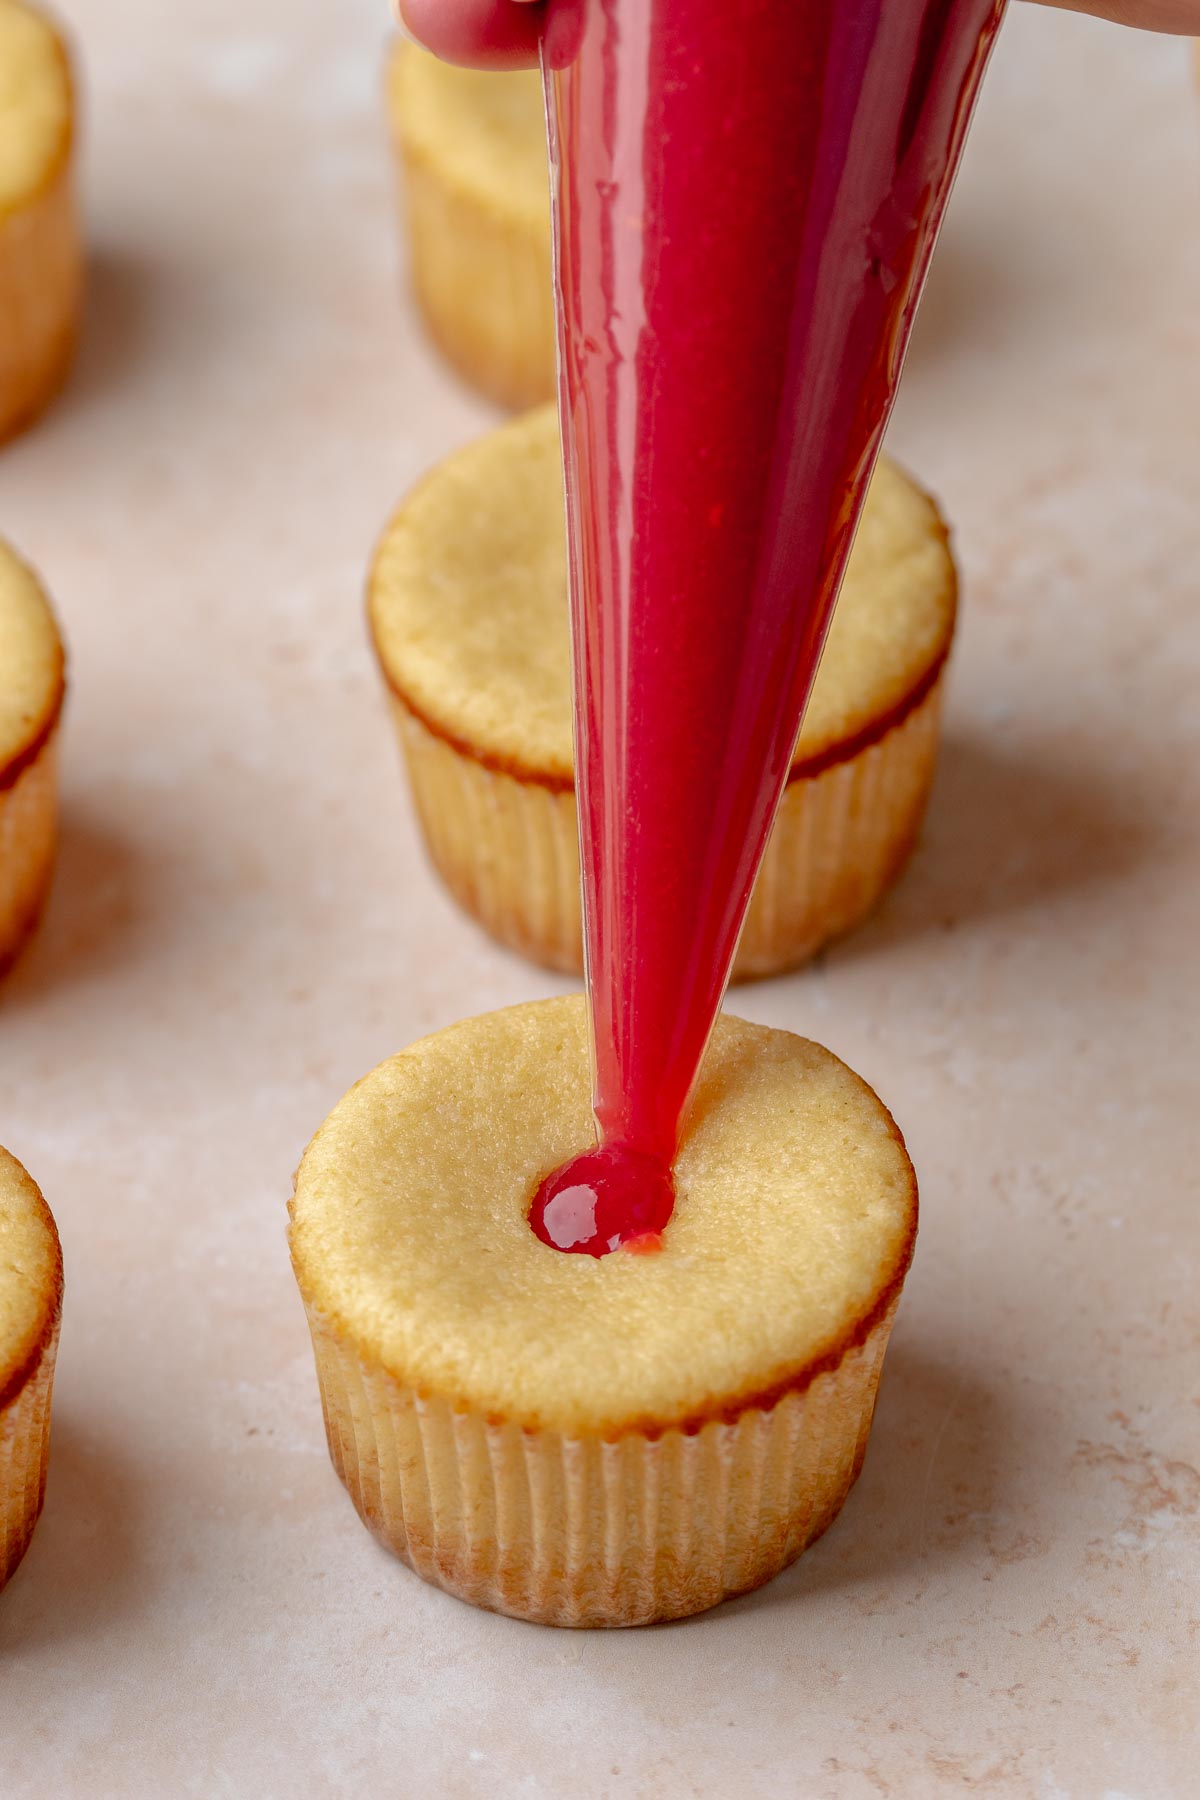 A piping bag adds raspberry filling into a cupcakes.